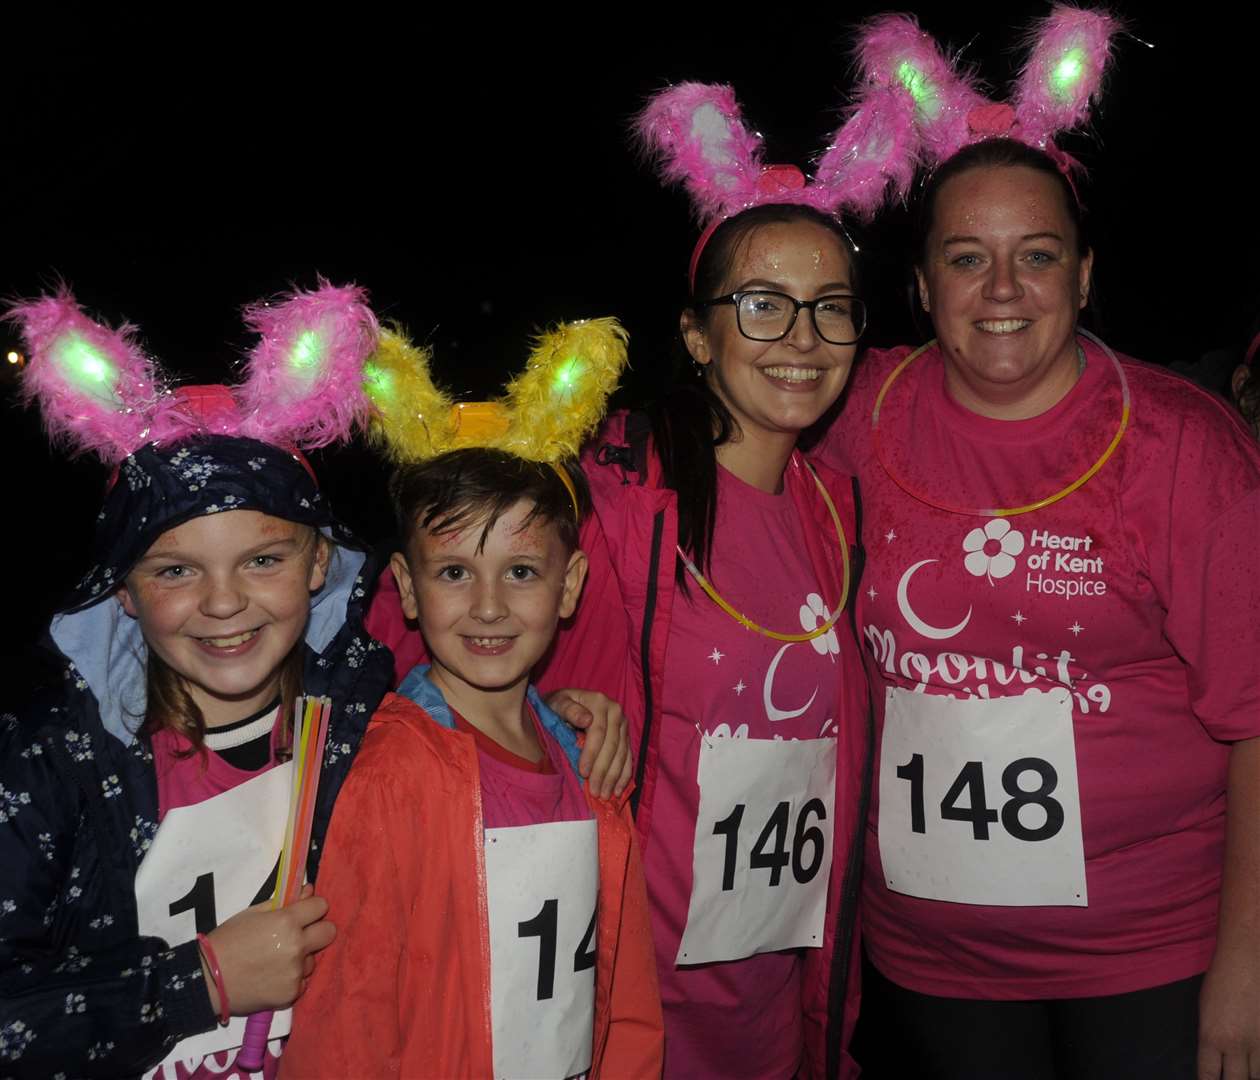 The Heart of Kent Hospice Moonlit Walk will go ahead this year despite the challenges of the pandemic